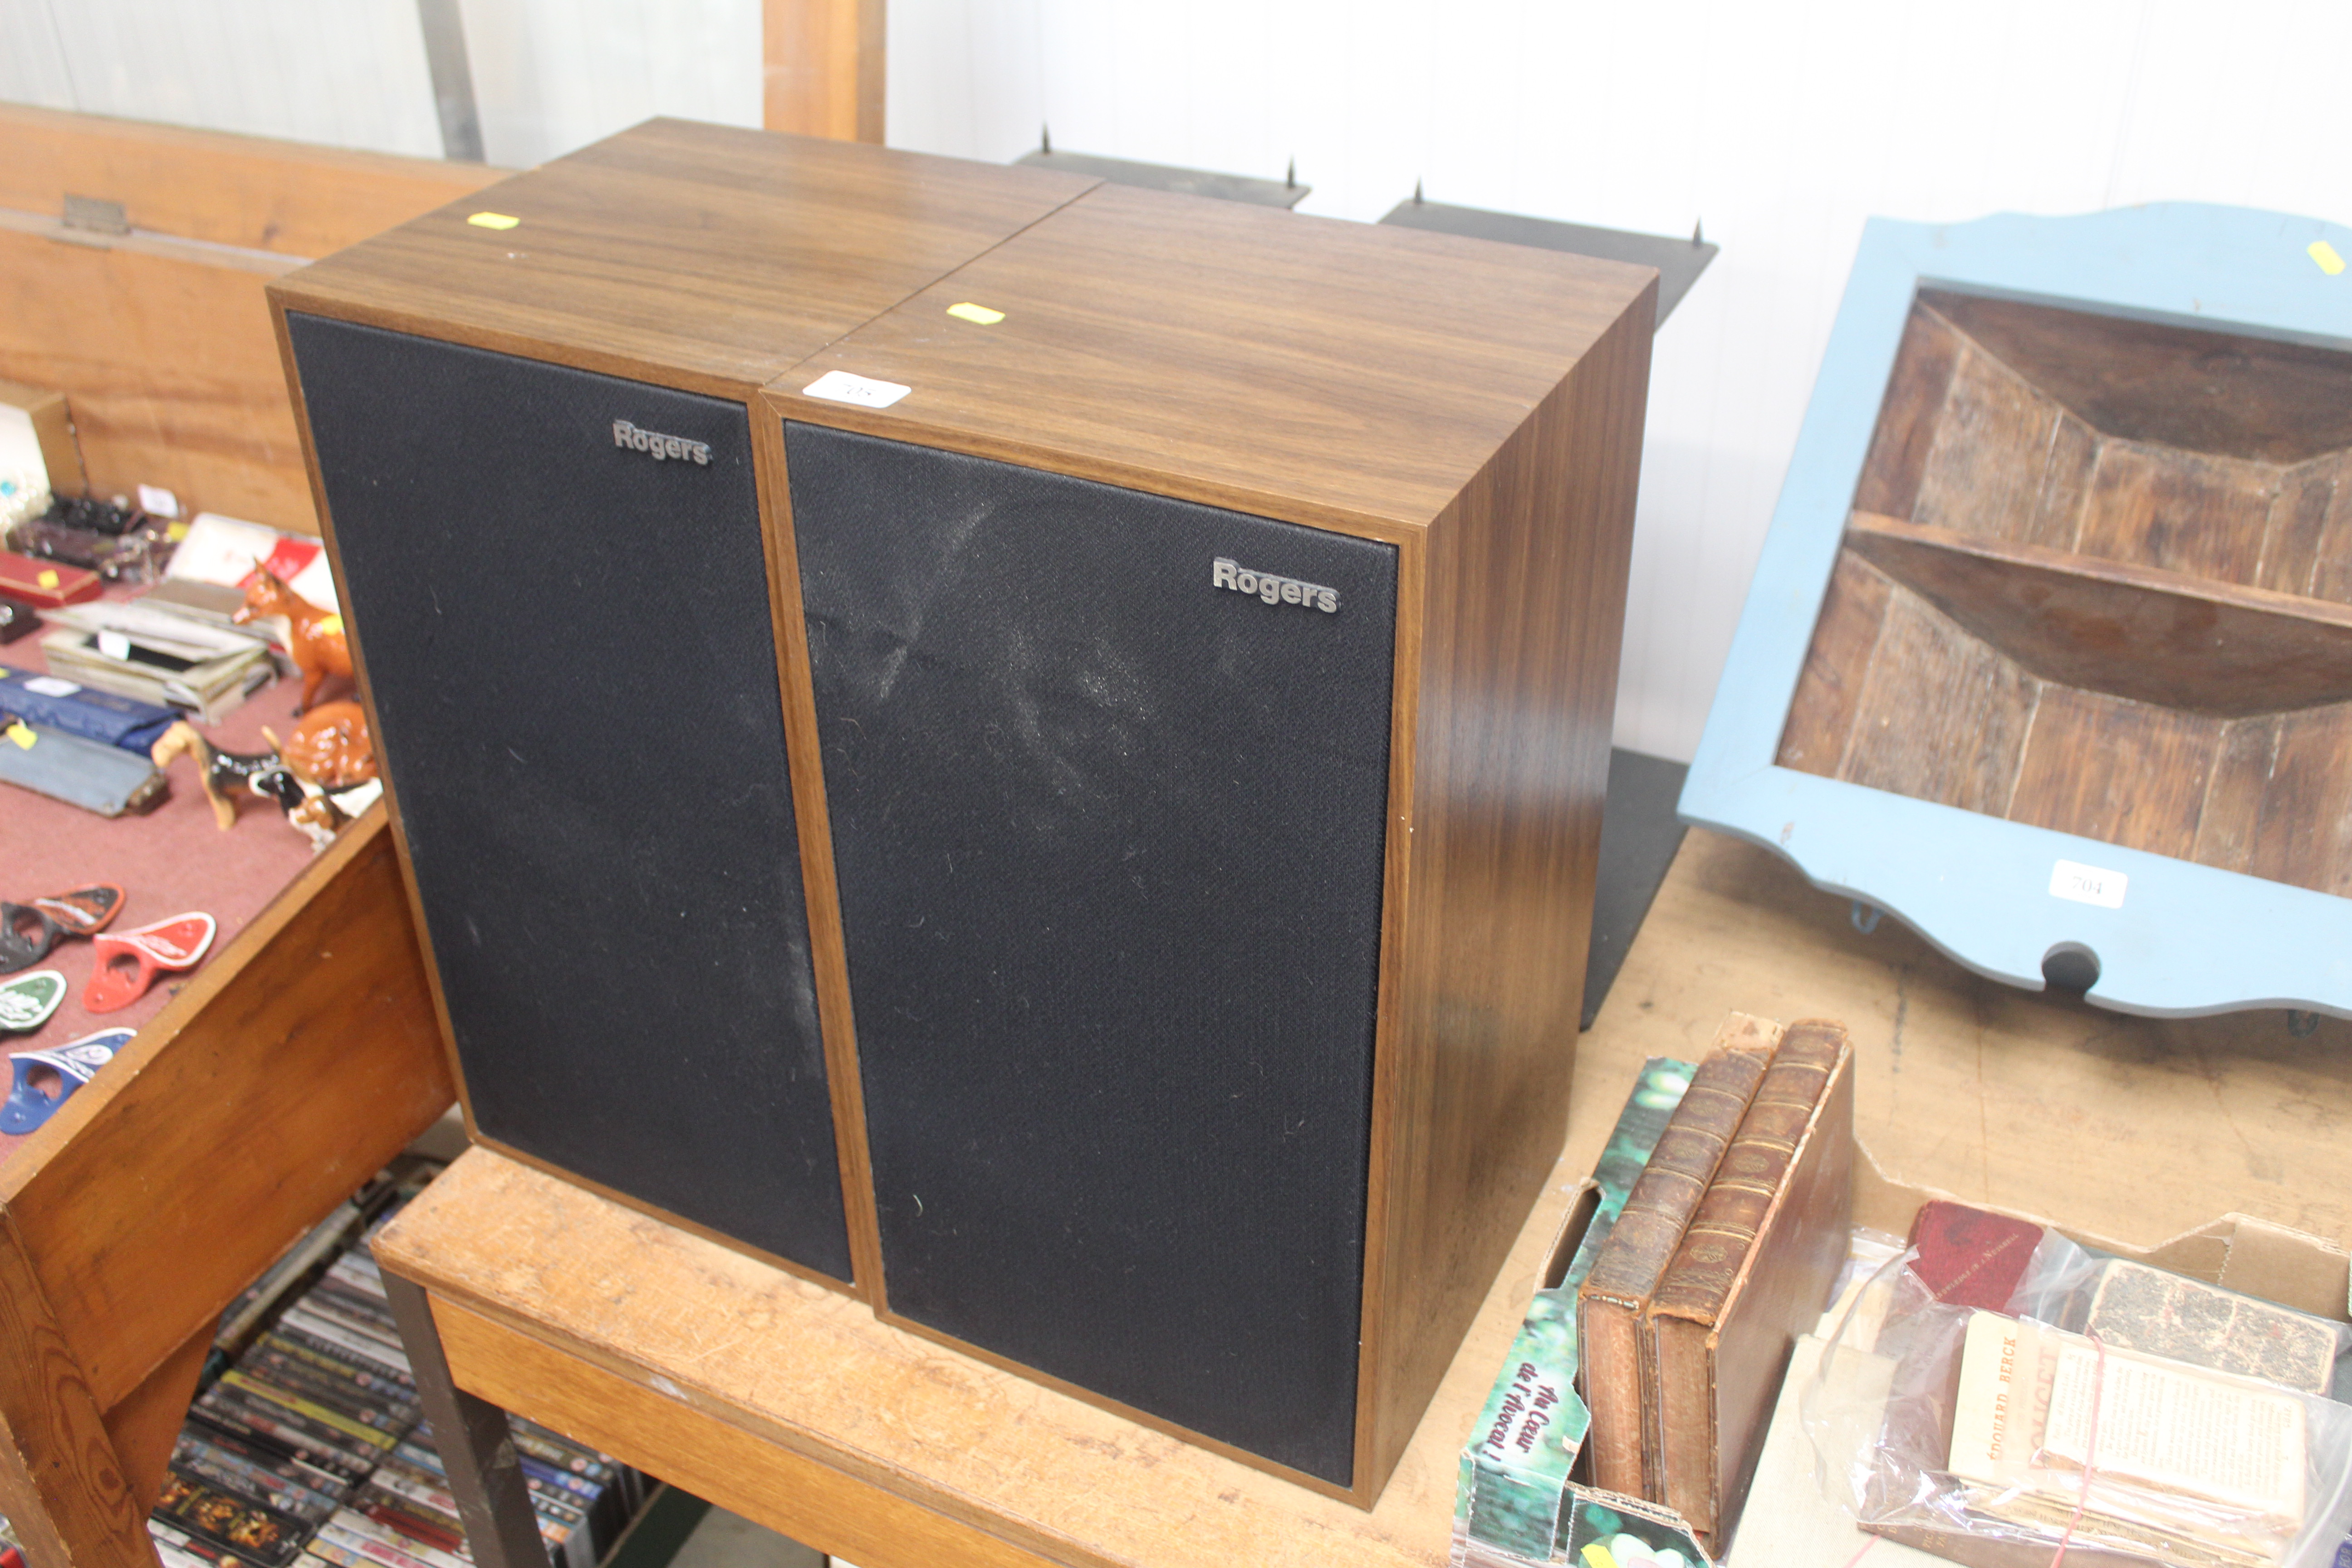 A pair of Rogers LS6A speakers and stands